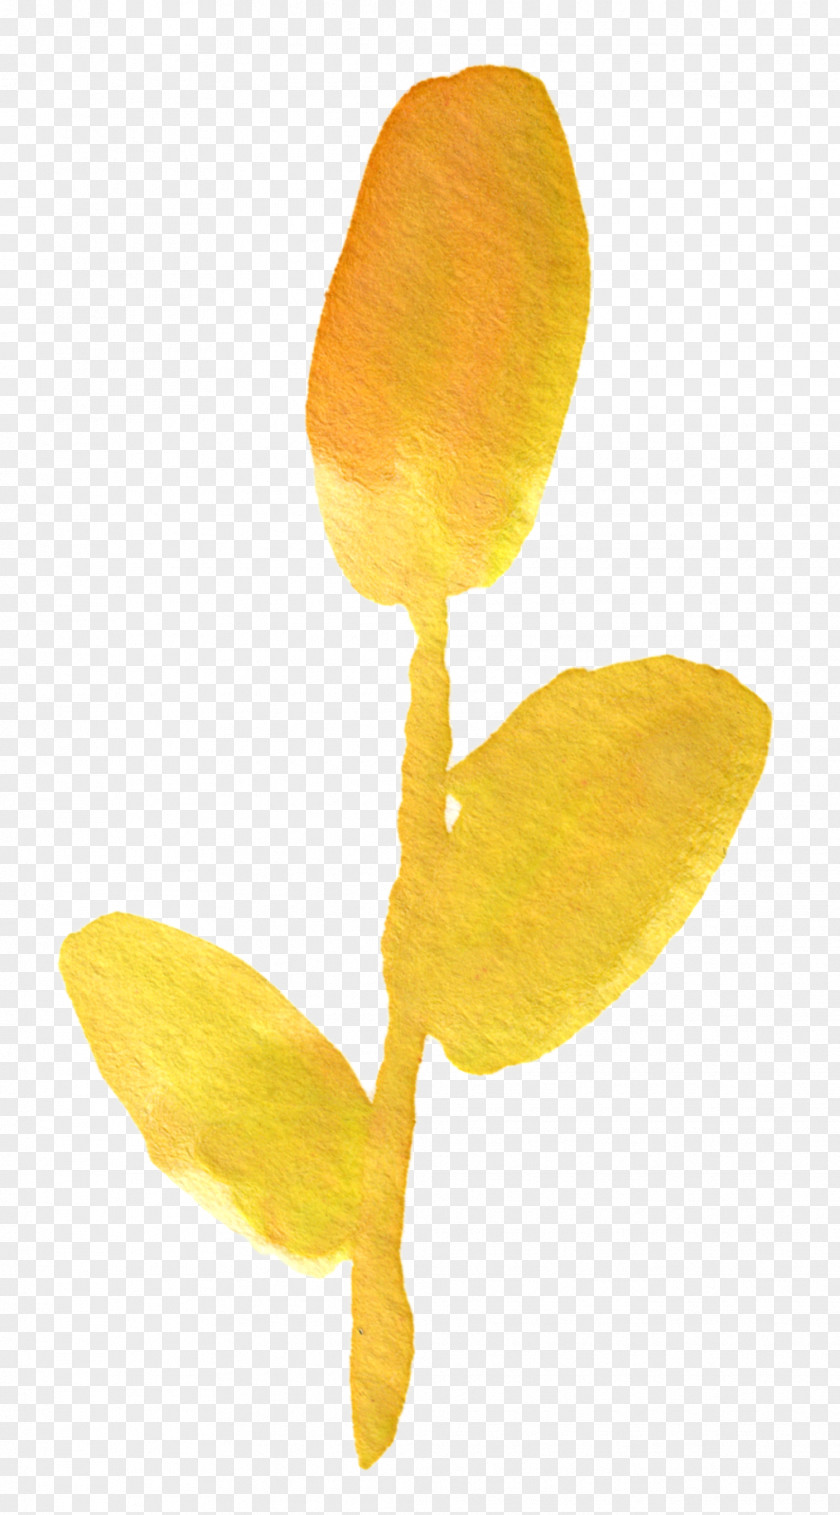 Yellow Watercolor Flower Painting Floral Design Clip Art PNG